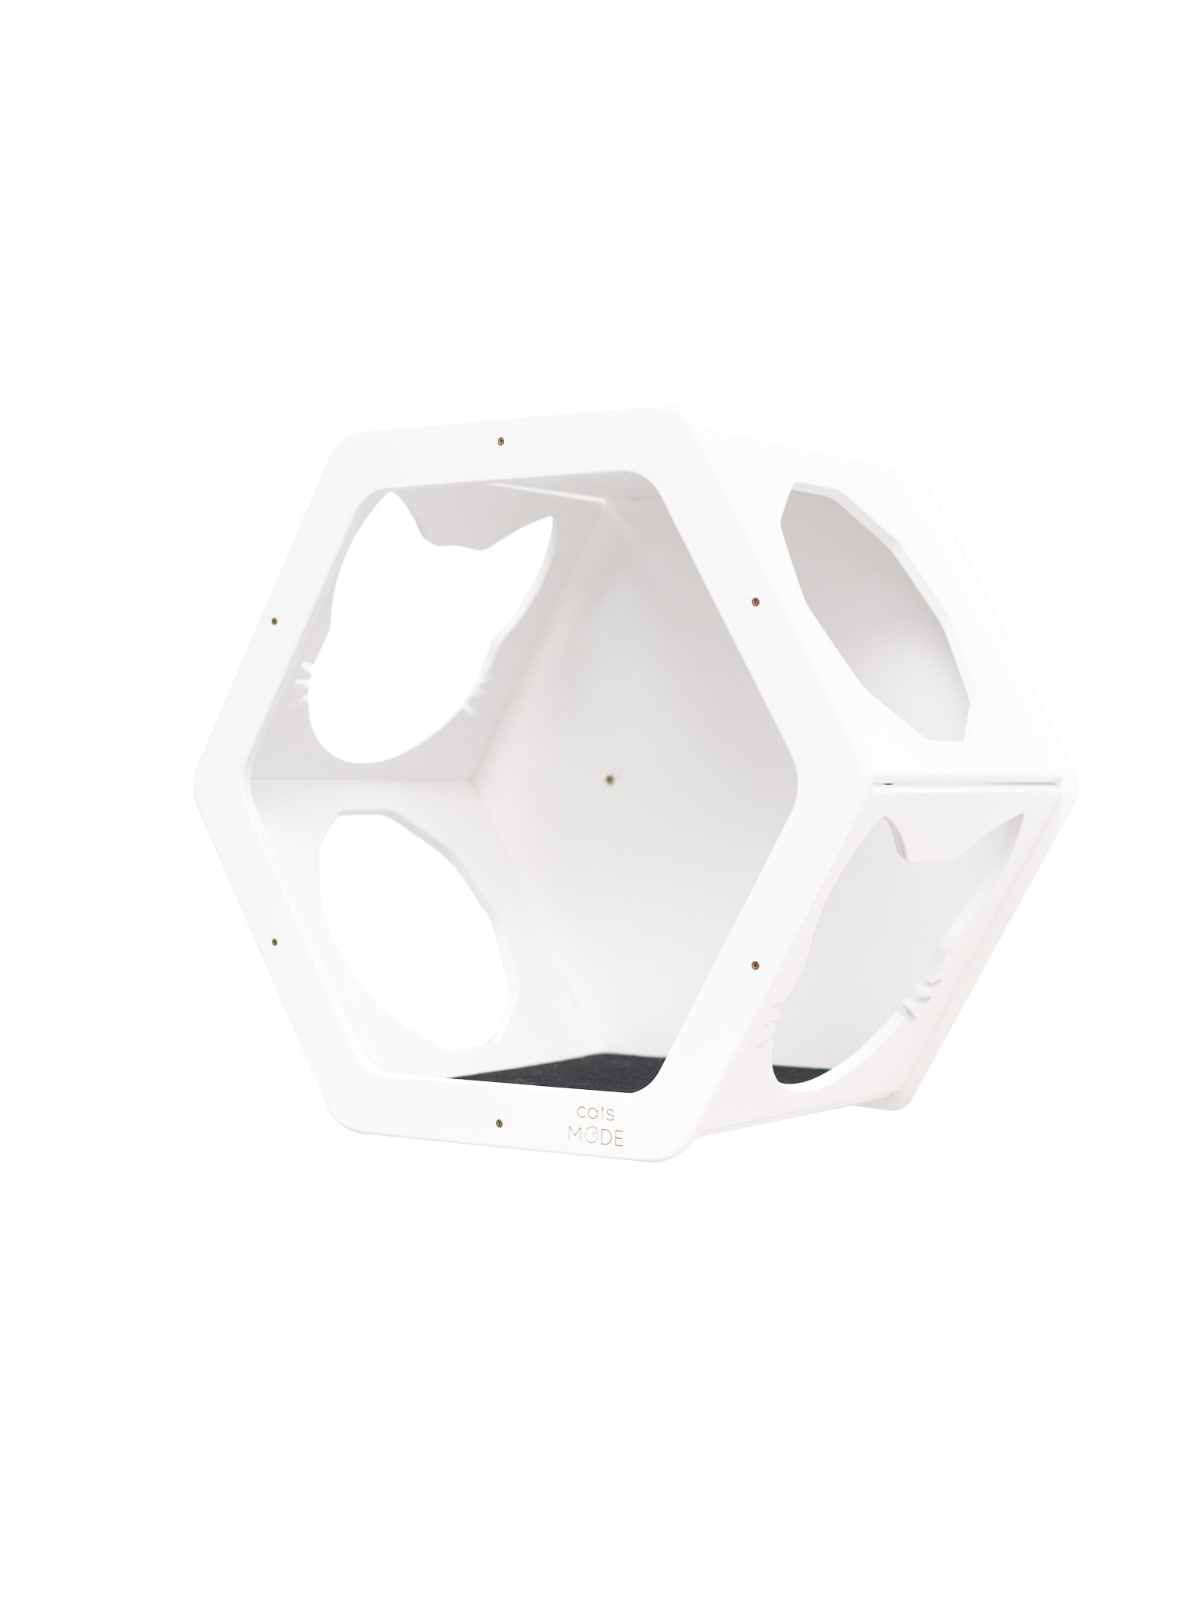 cat shelves hexagon in white color made by CatsMode